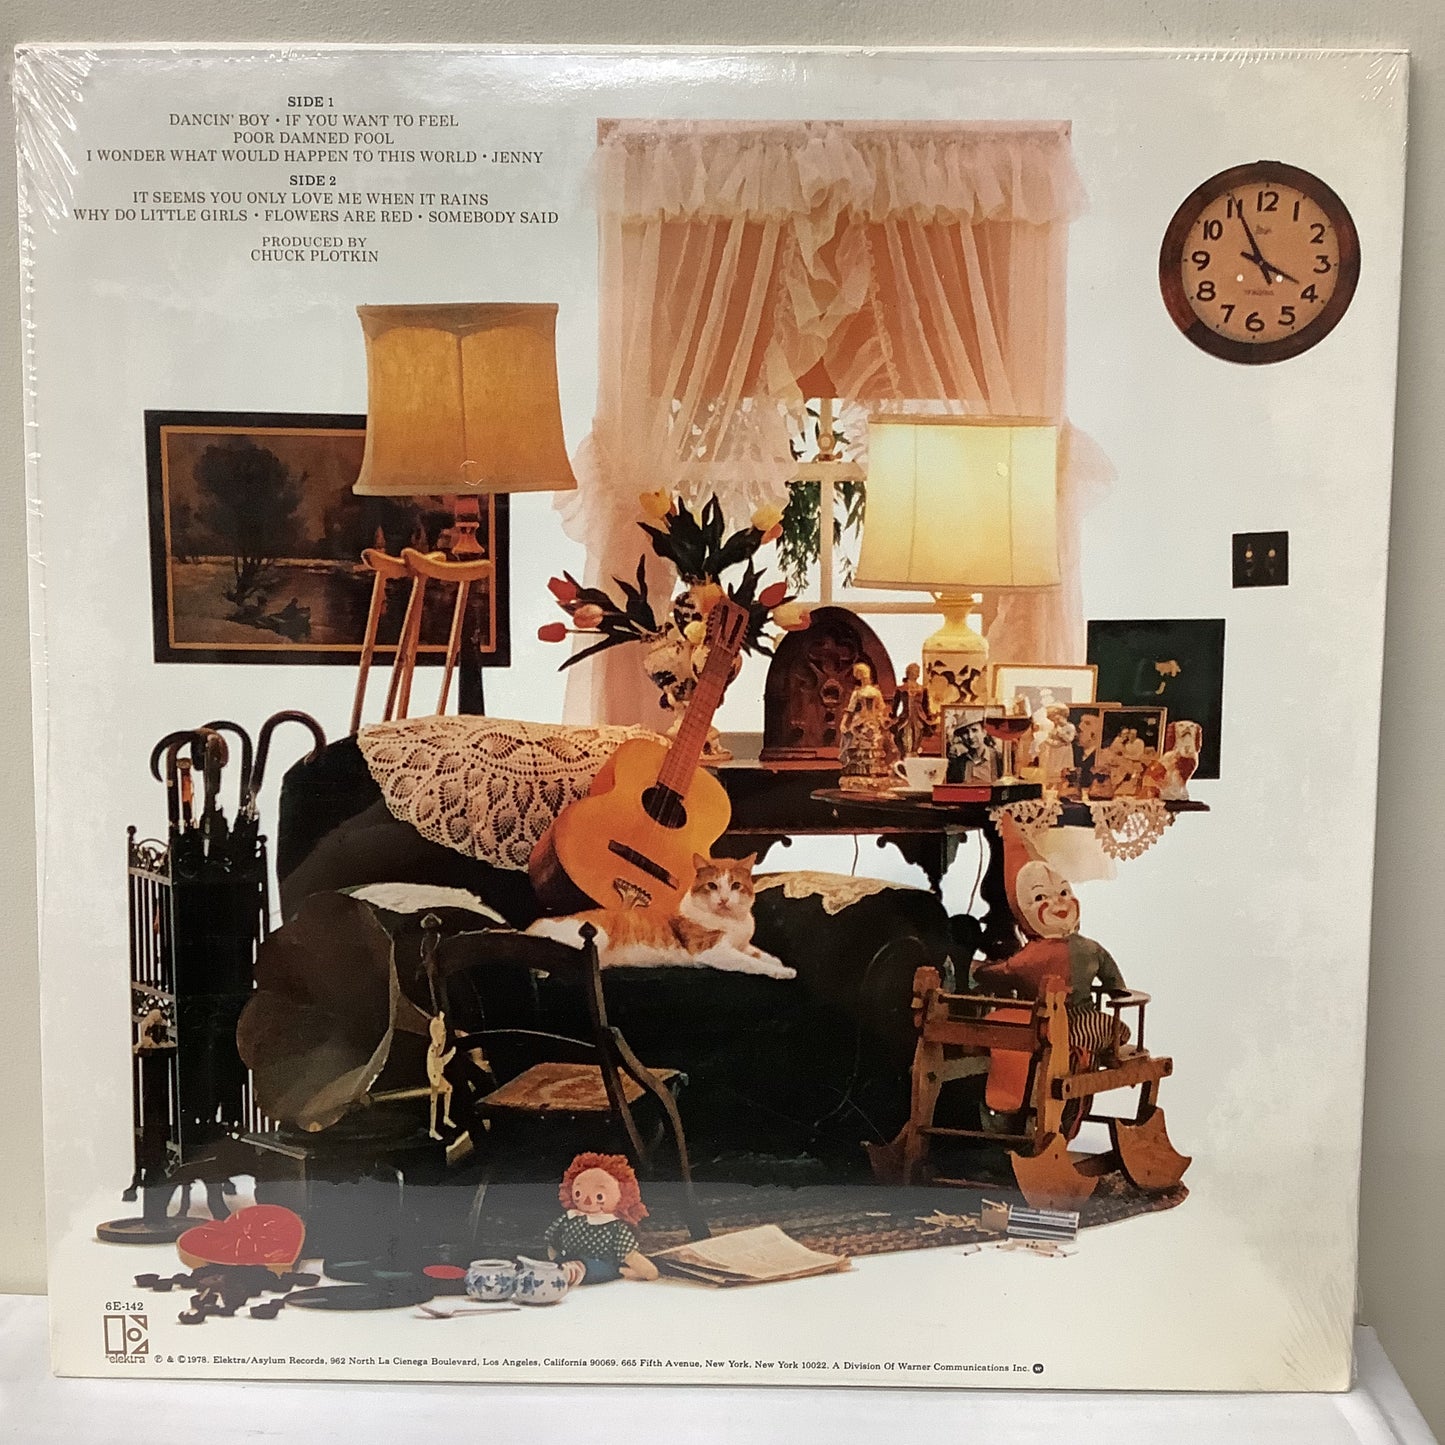 Harry Chapin - Living Room Suite - LP